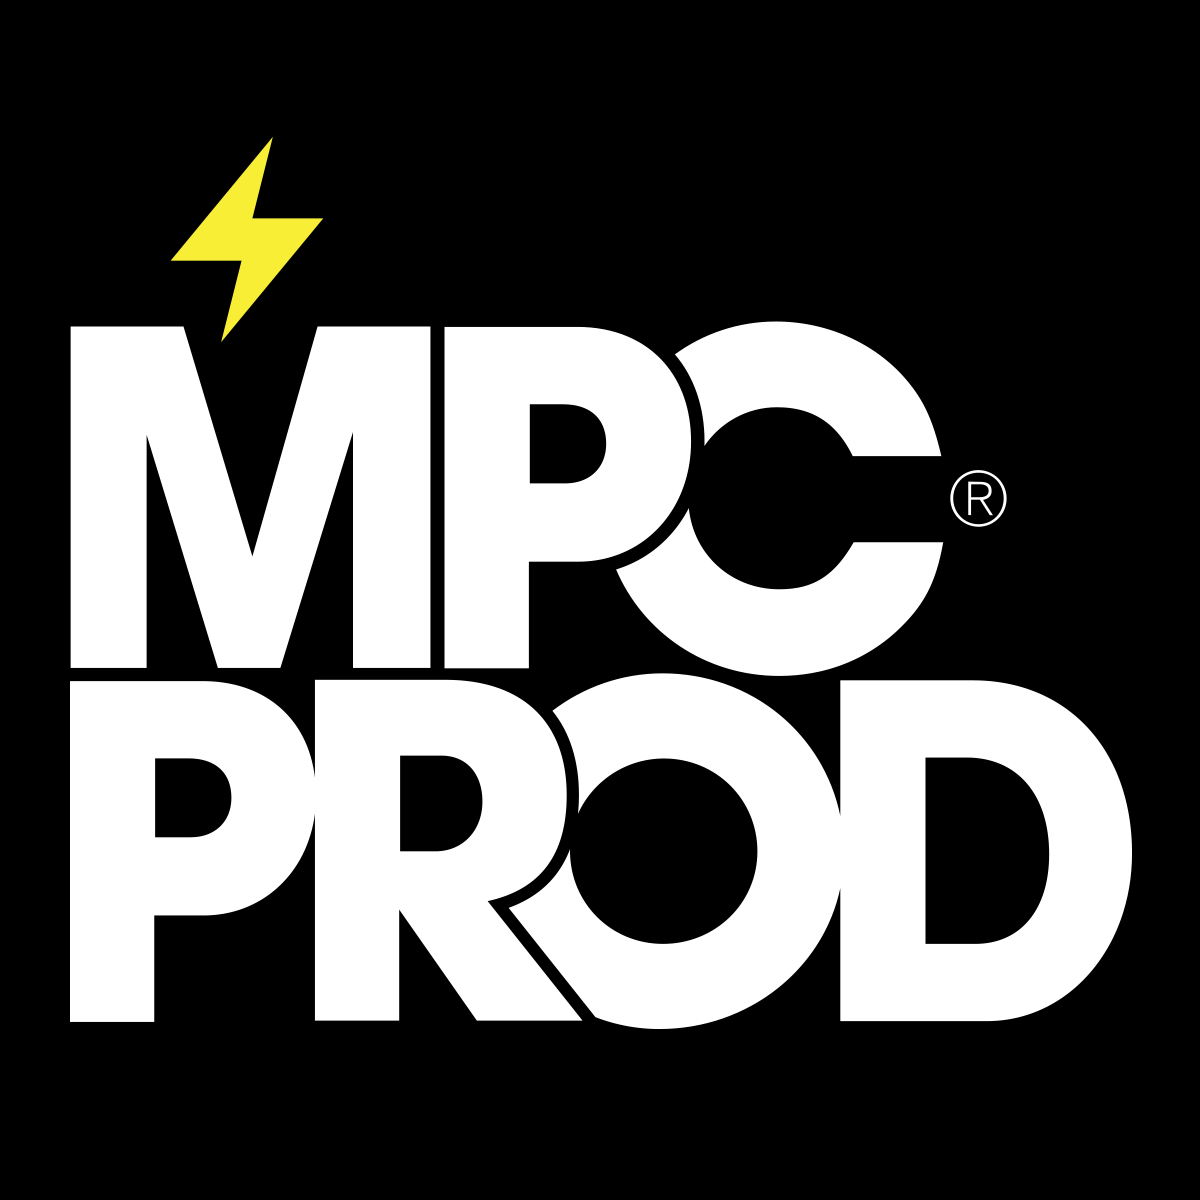 MPC-BE 1.6.8 for mac download